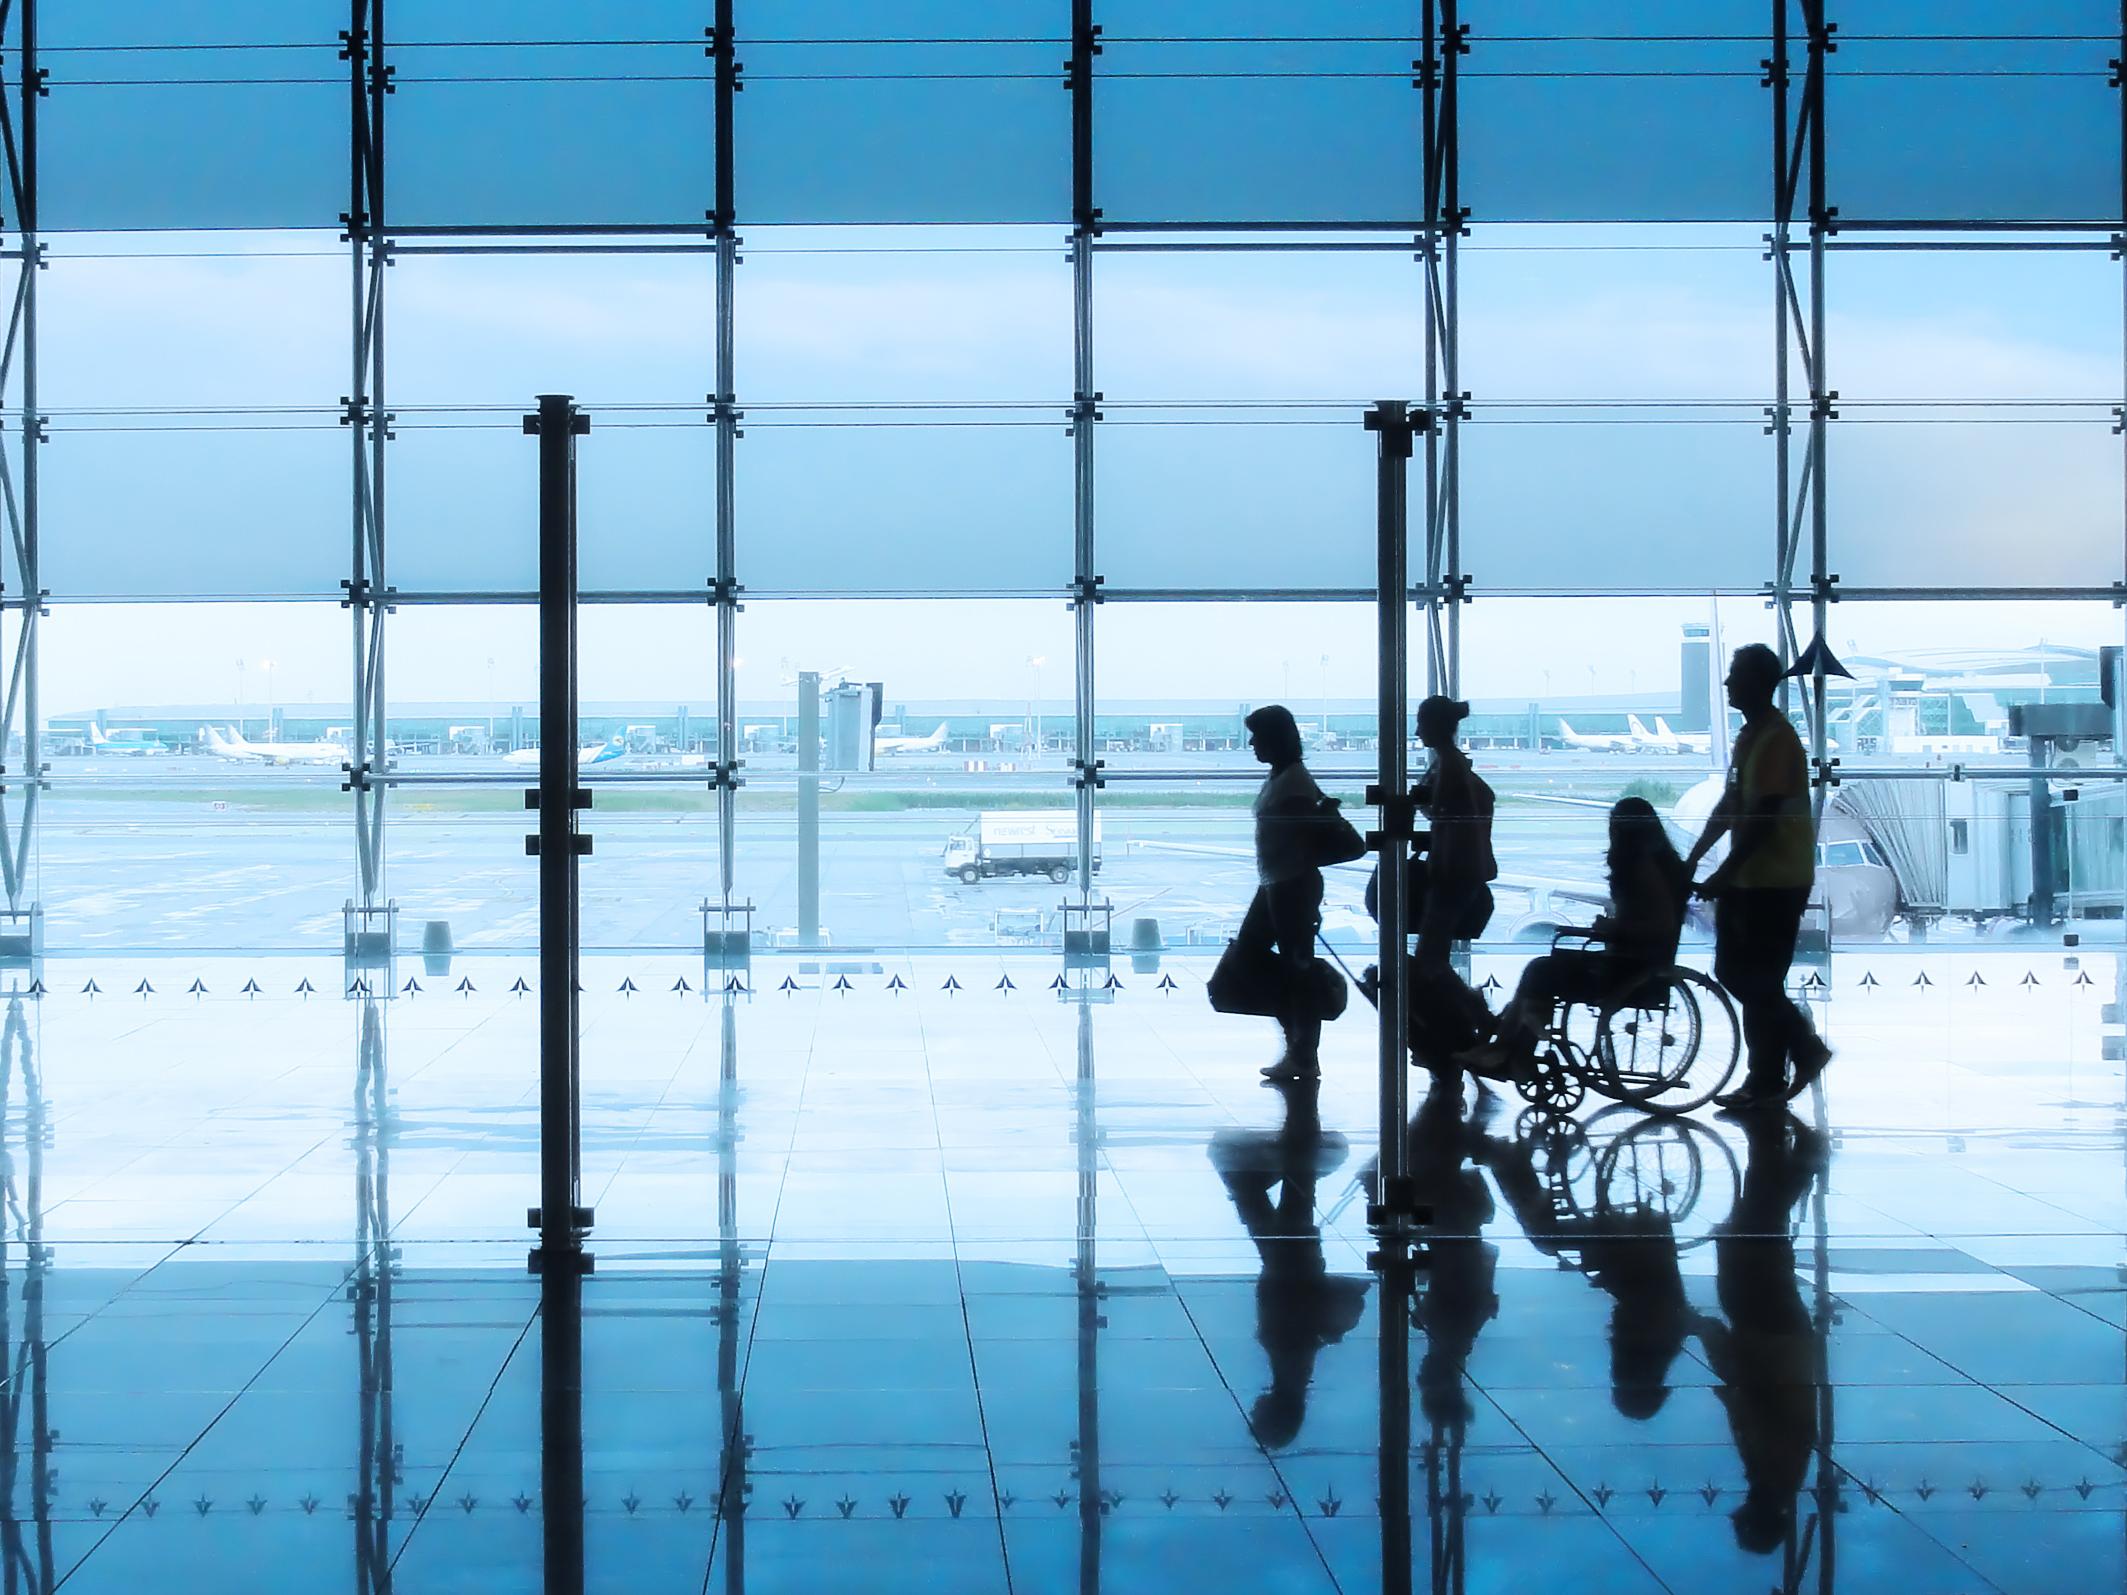 Many regional airports are improving their special assistance